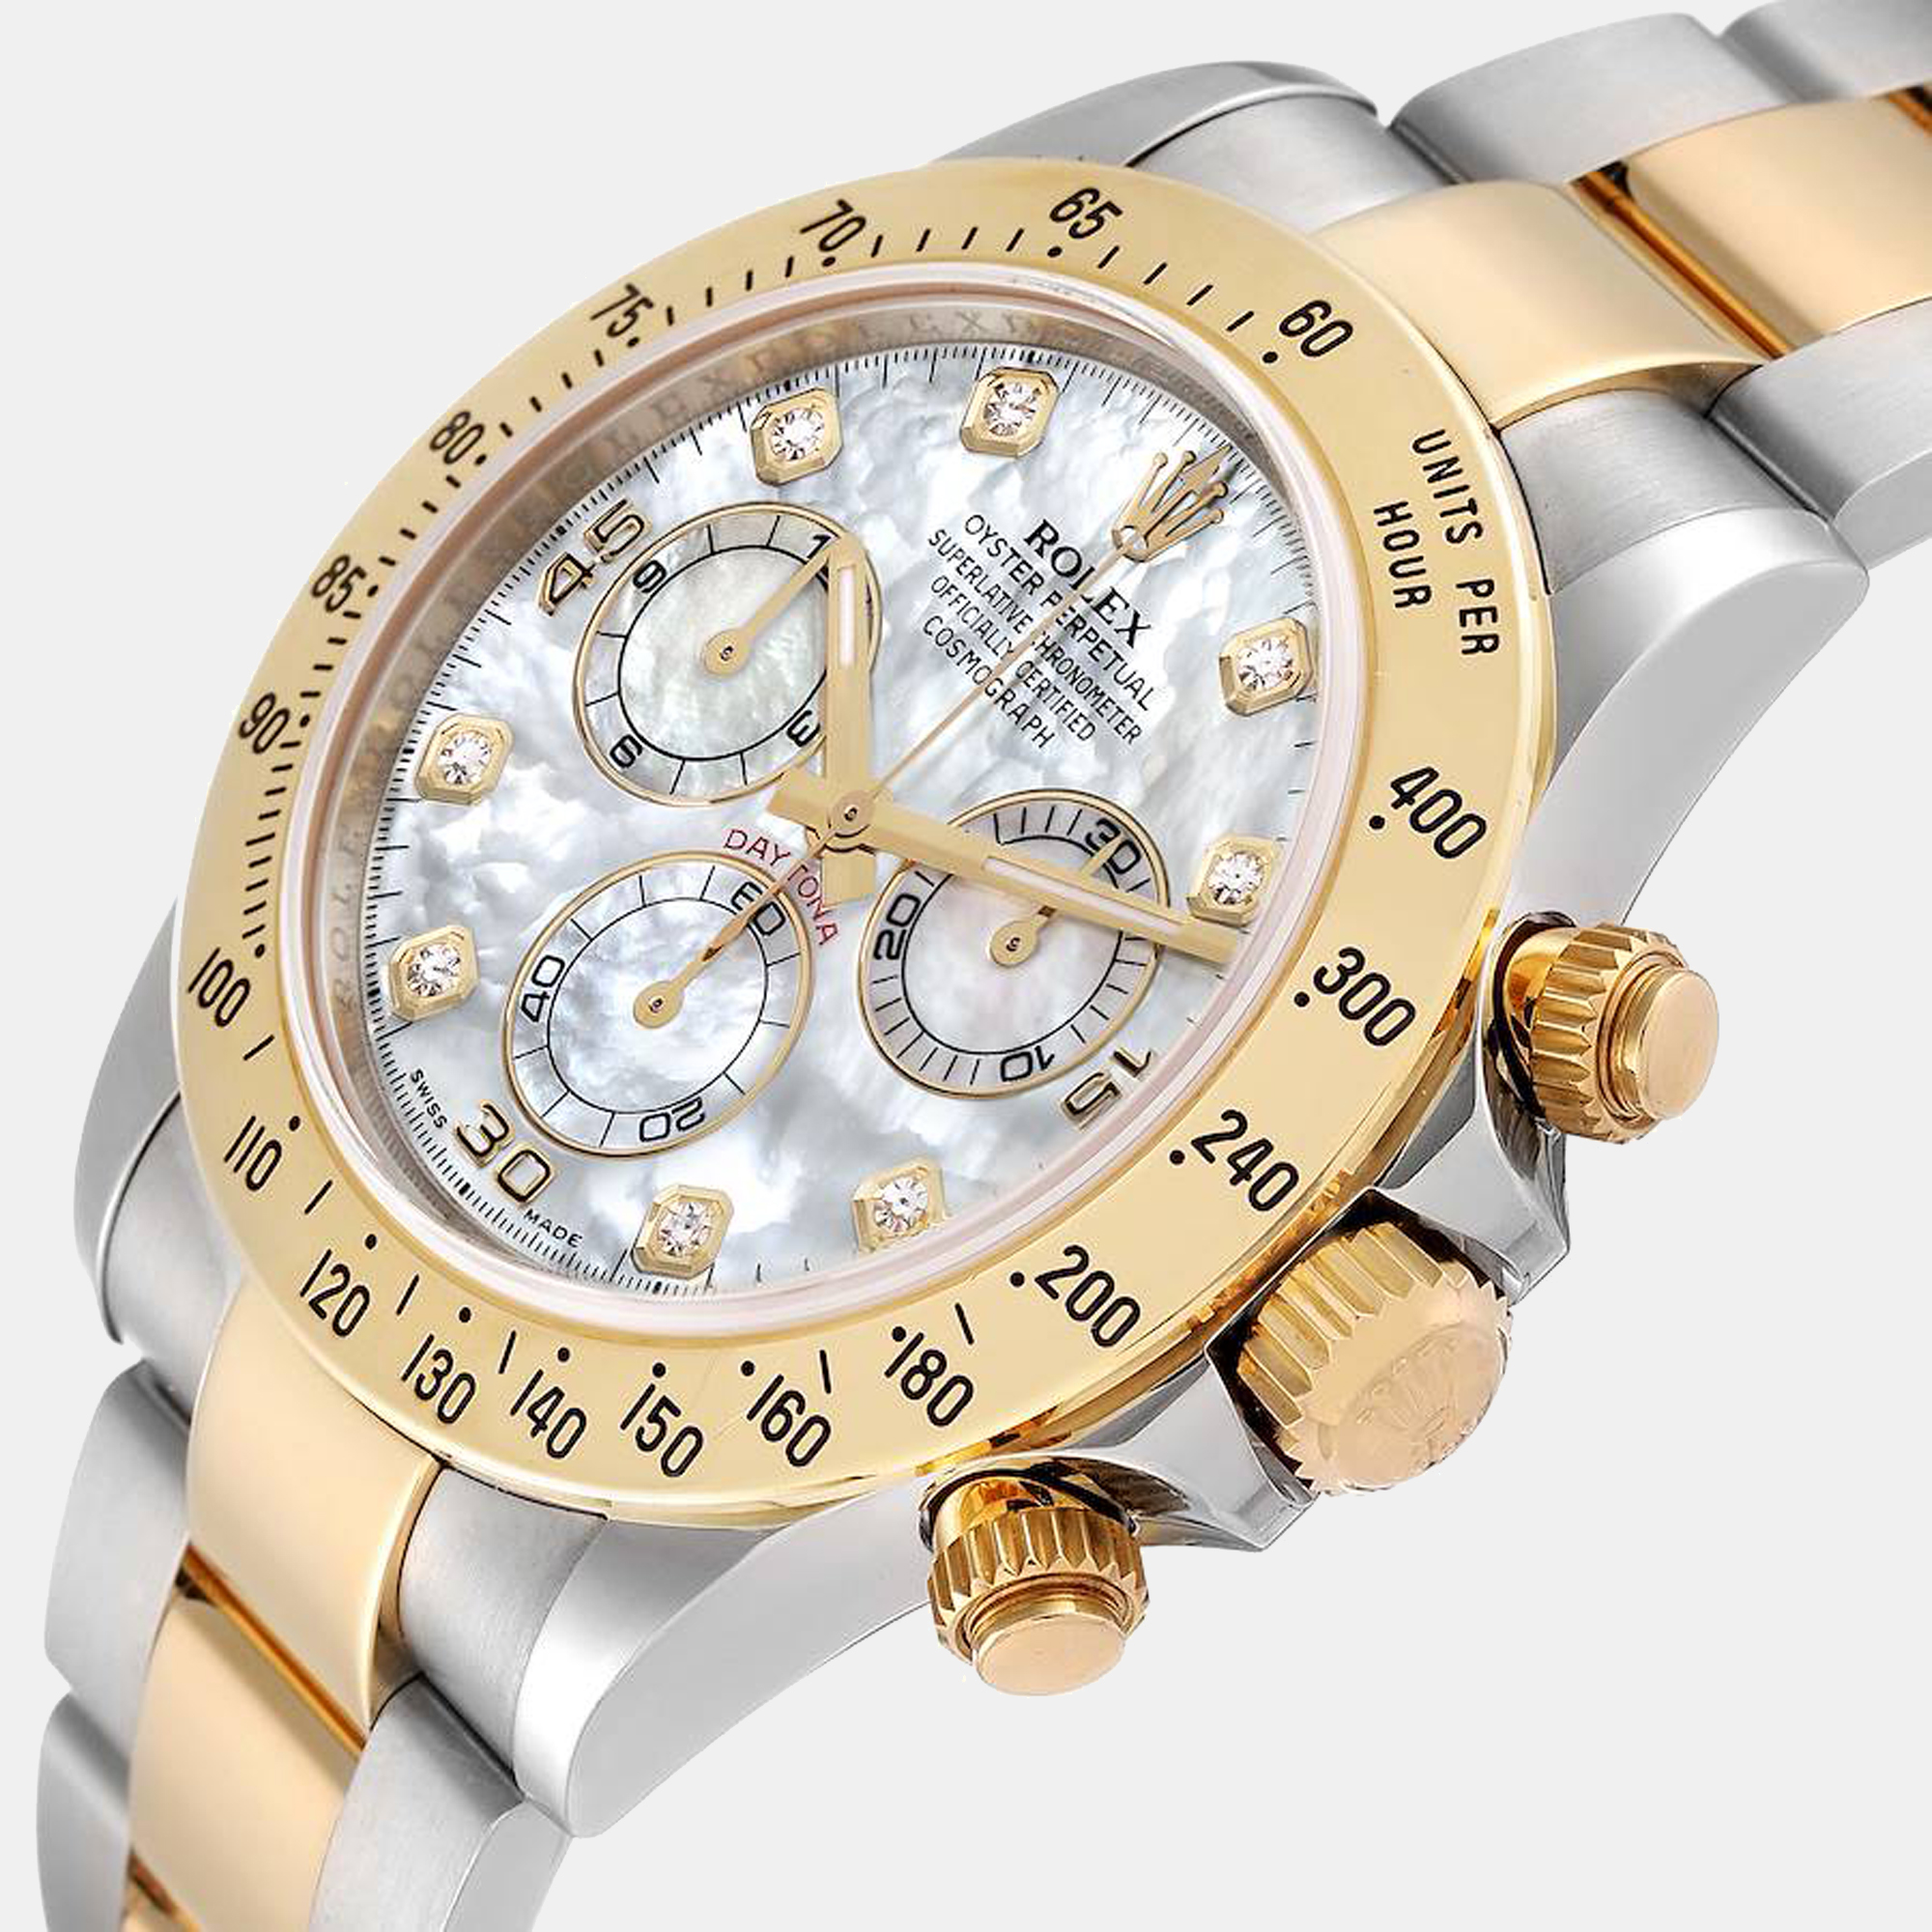 

Rolex MOP Diamonds 18K Yellow Gold And Stainless Steel Cosmograph Daytona 116523 Automatic Men's Wristwatch 40 mm, White